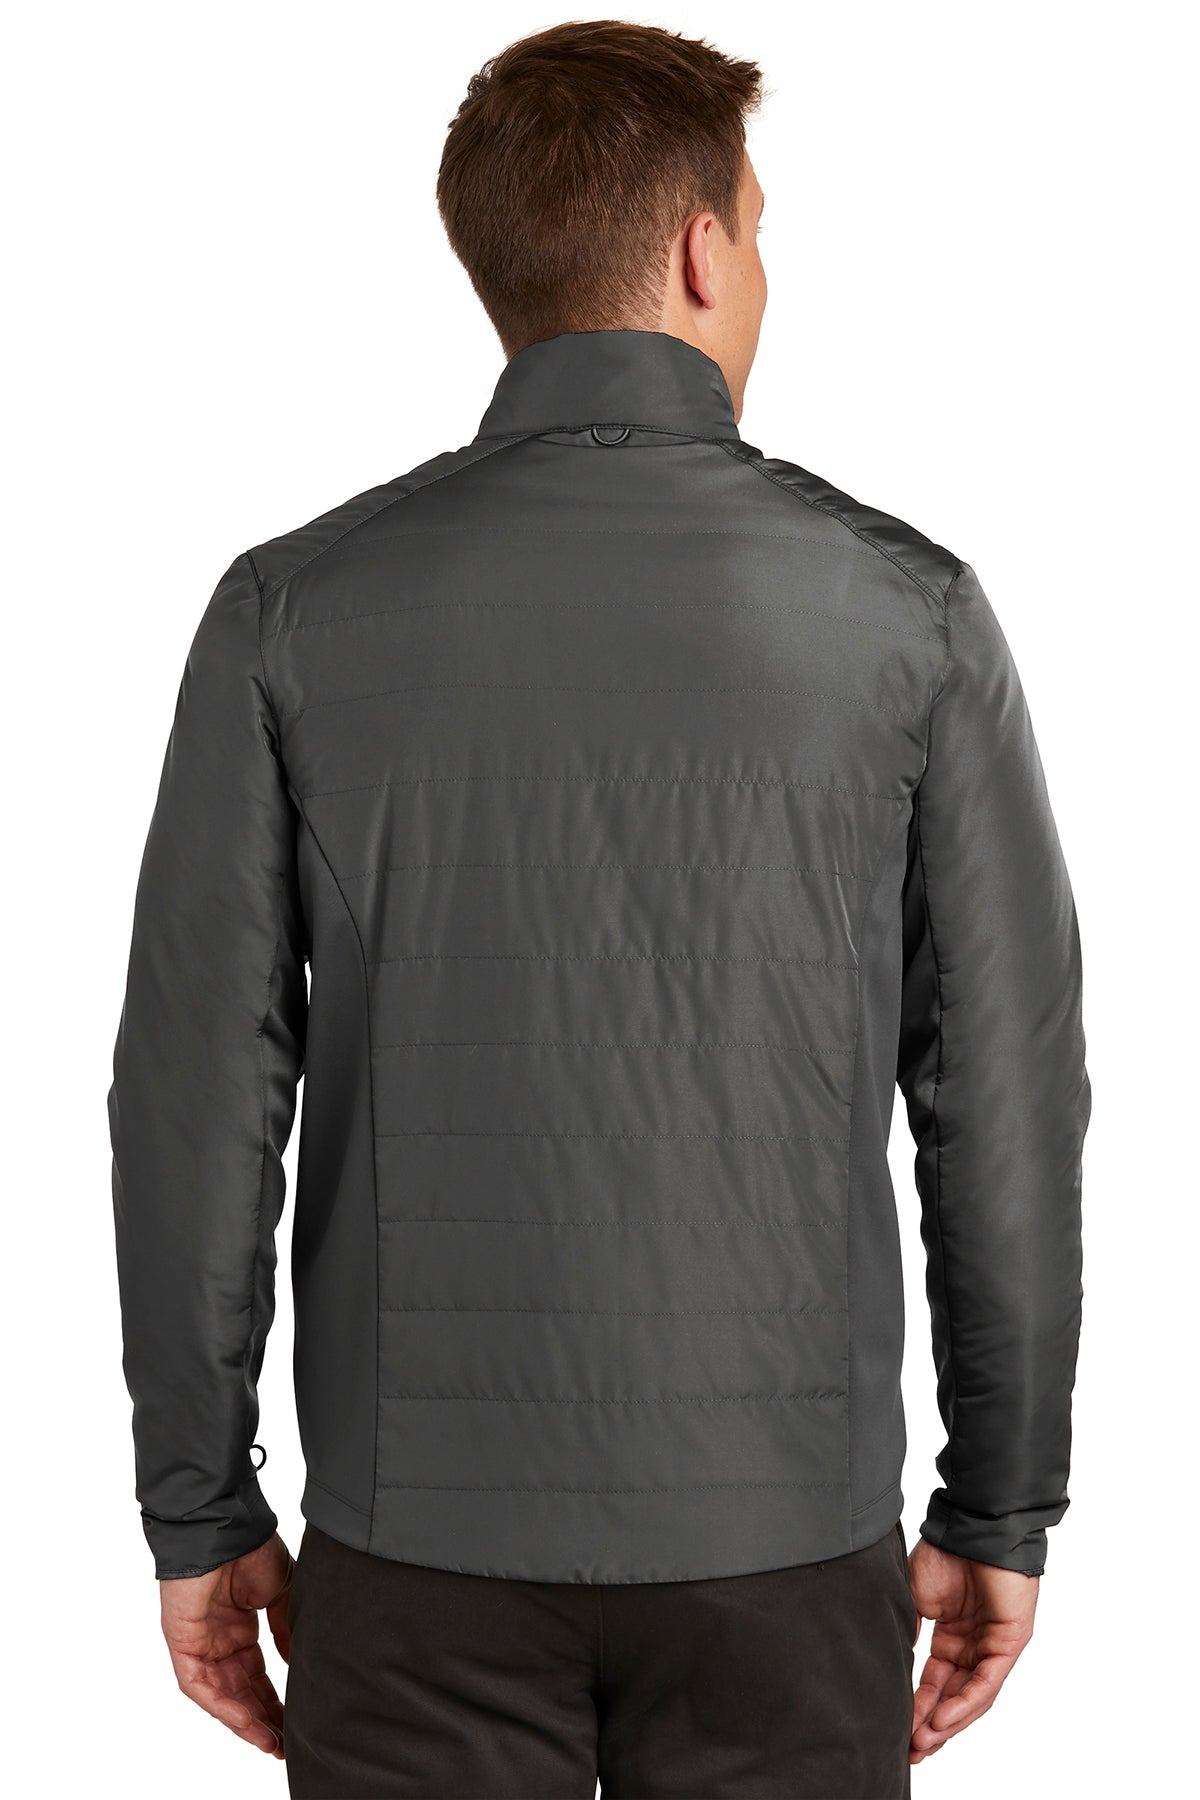 Windsor - Collective Insulated Jacket with W - Graphite - Southern Grace Creations